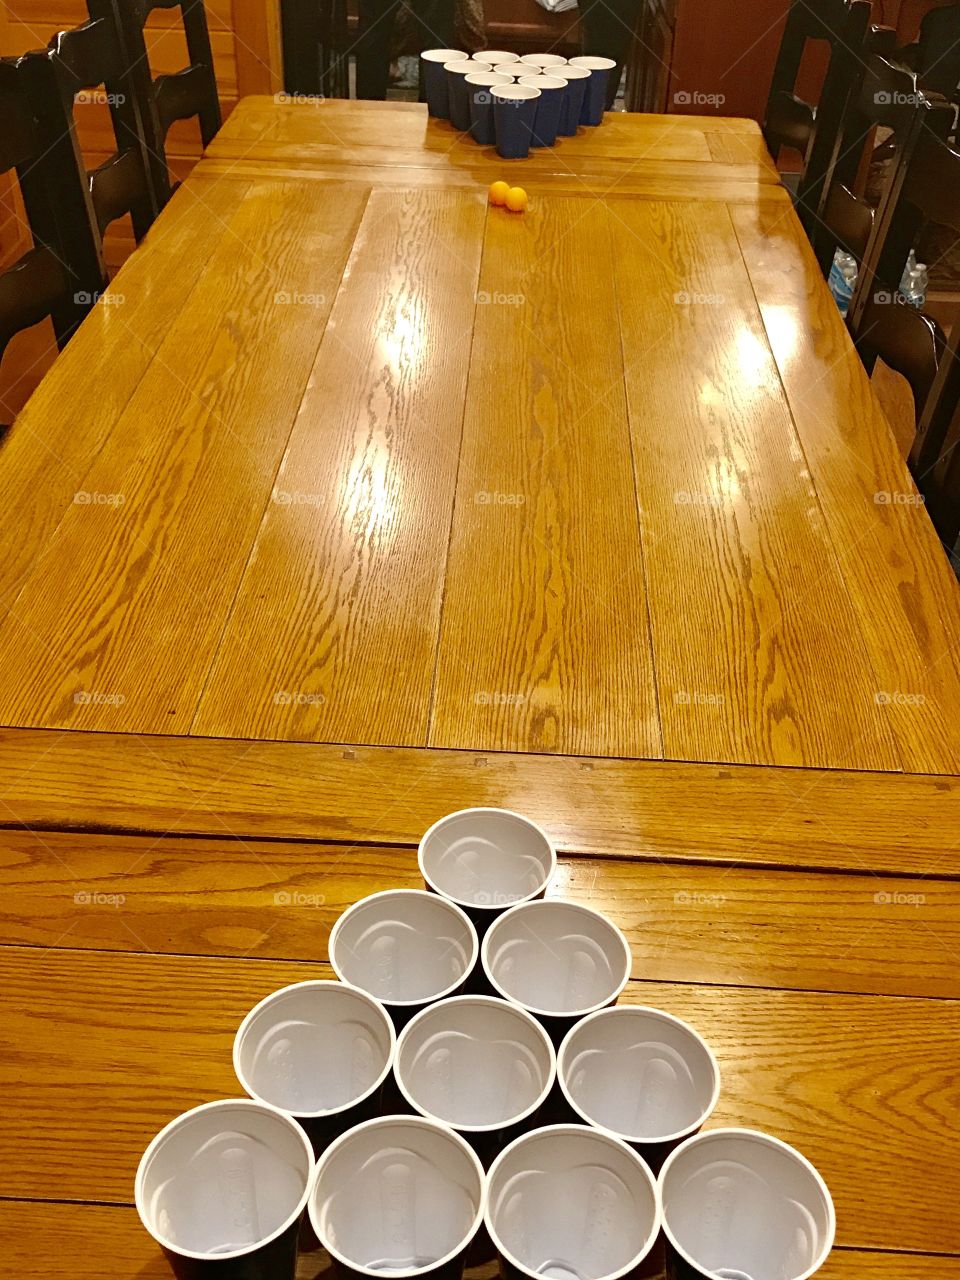 Setting up beer pong 